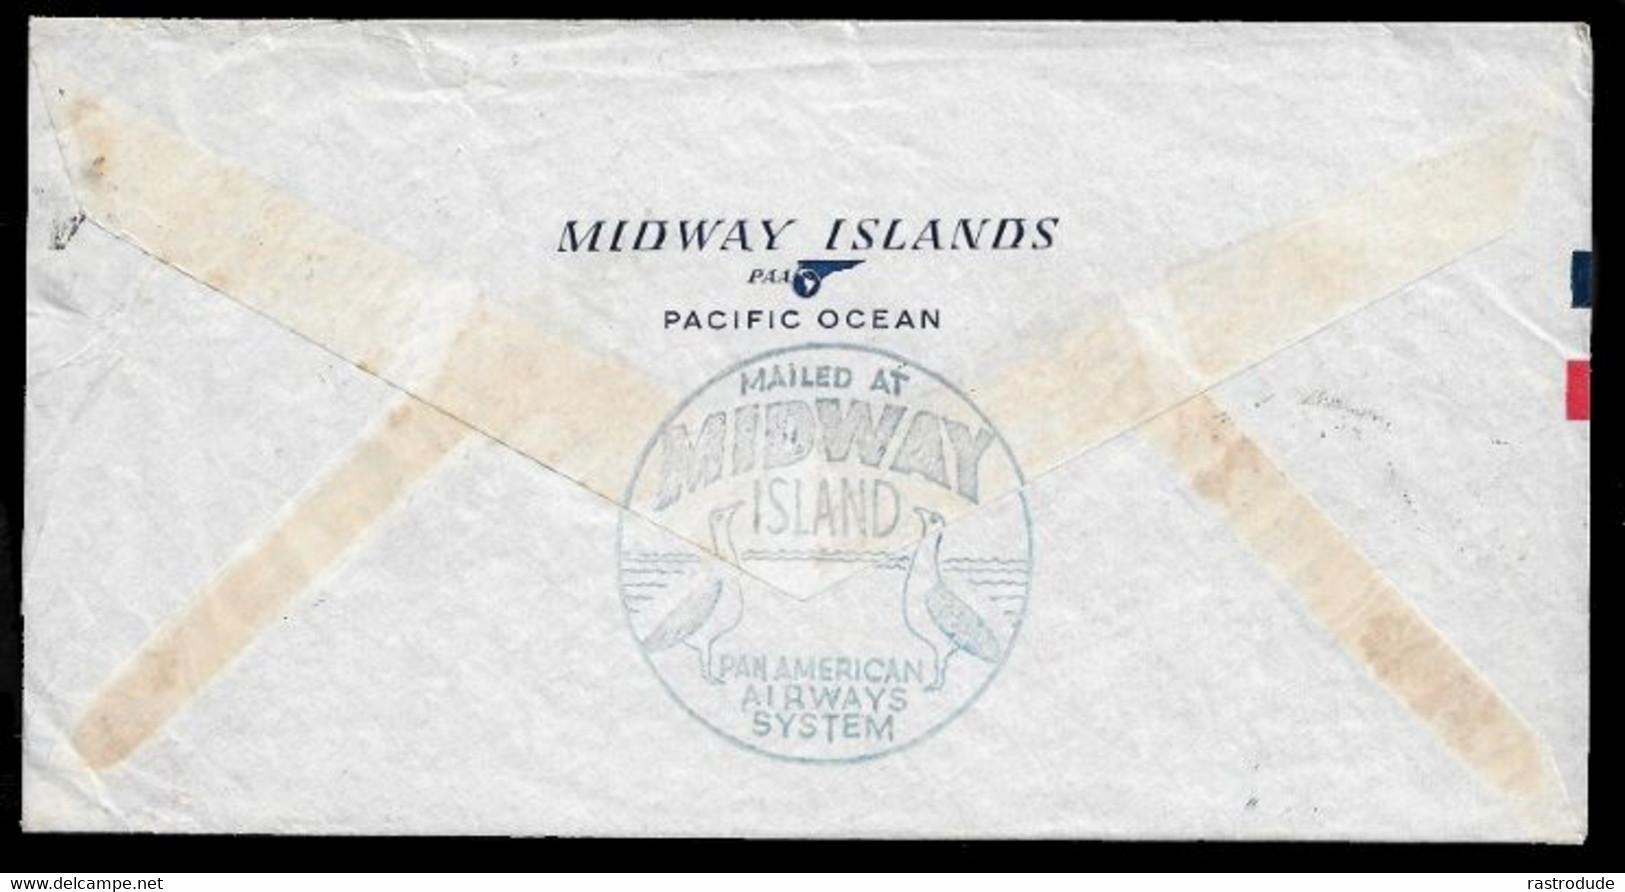 1941 AUG 15 - TRANSPACIFIC AIR MAIL - MAILED AT MIDWAY ISLANDS - PAN AMERICAN AIRWAYS SYSTEM To PRINCETON - RARE - 2a. 1941-1960 Used